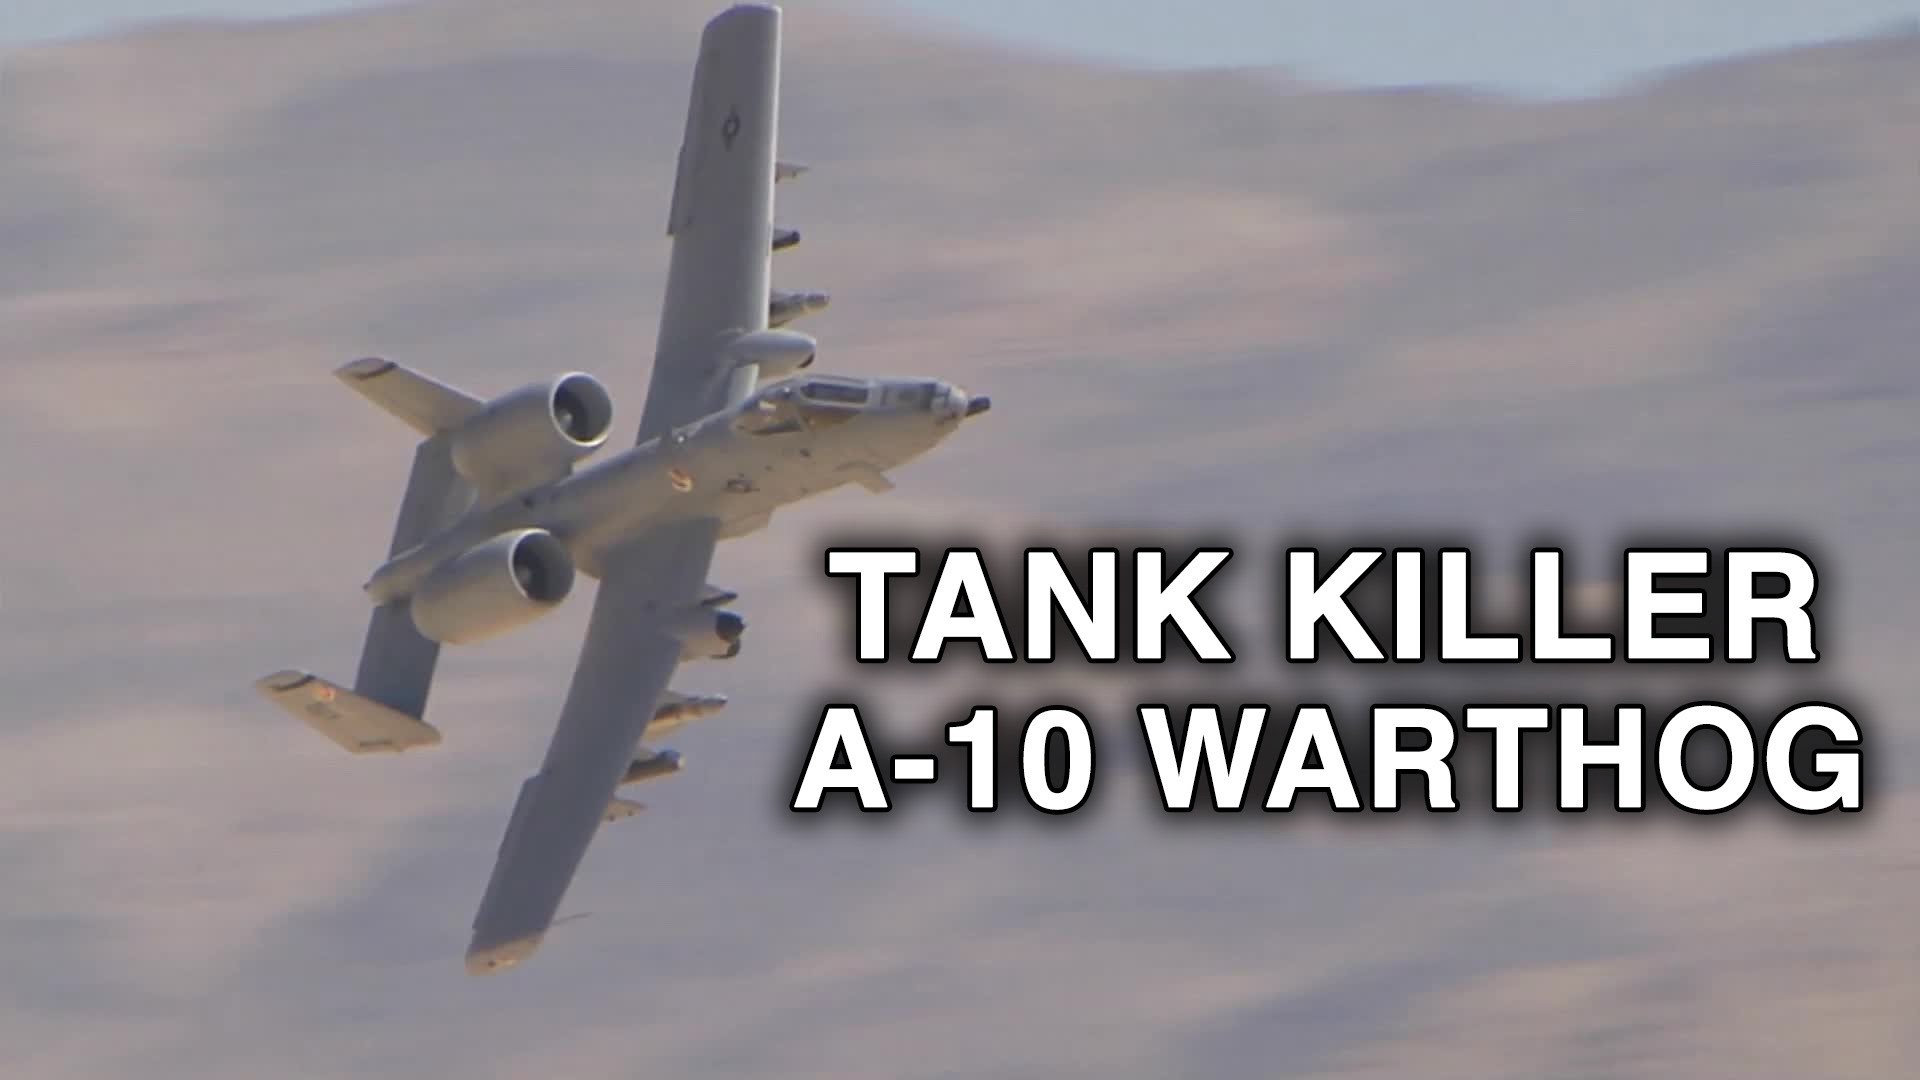 1920x1080 A-10 Warthog in Action - Avenger Autocannon, Rockets Live Fire - YouTube